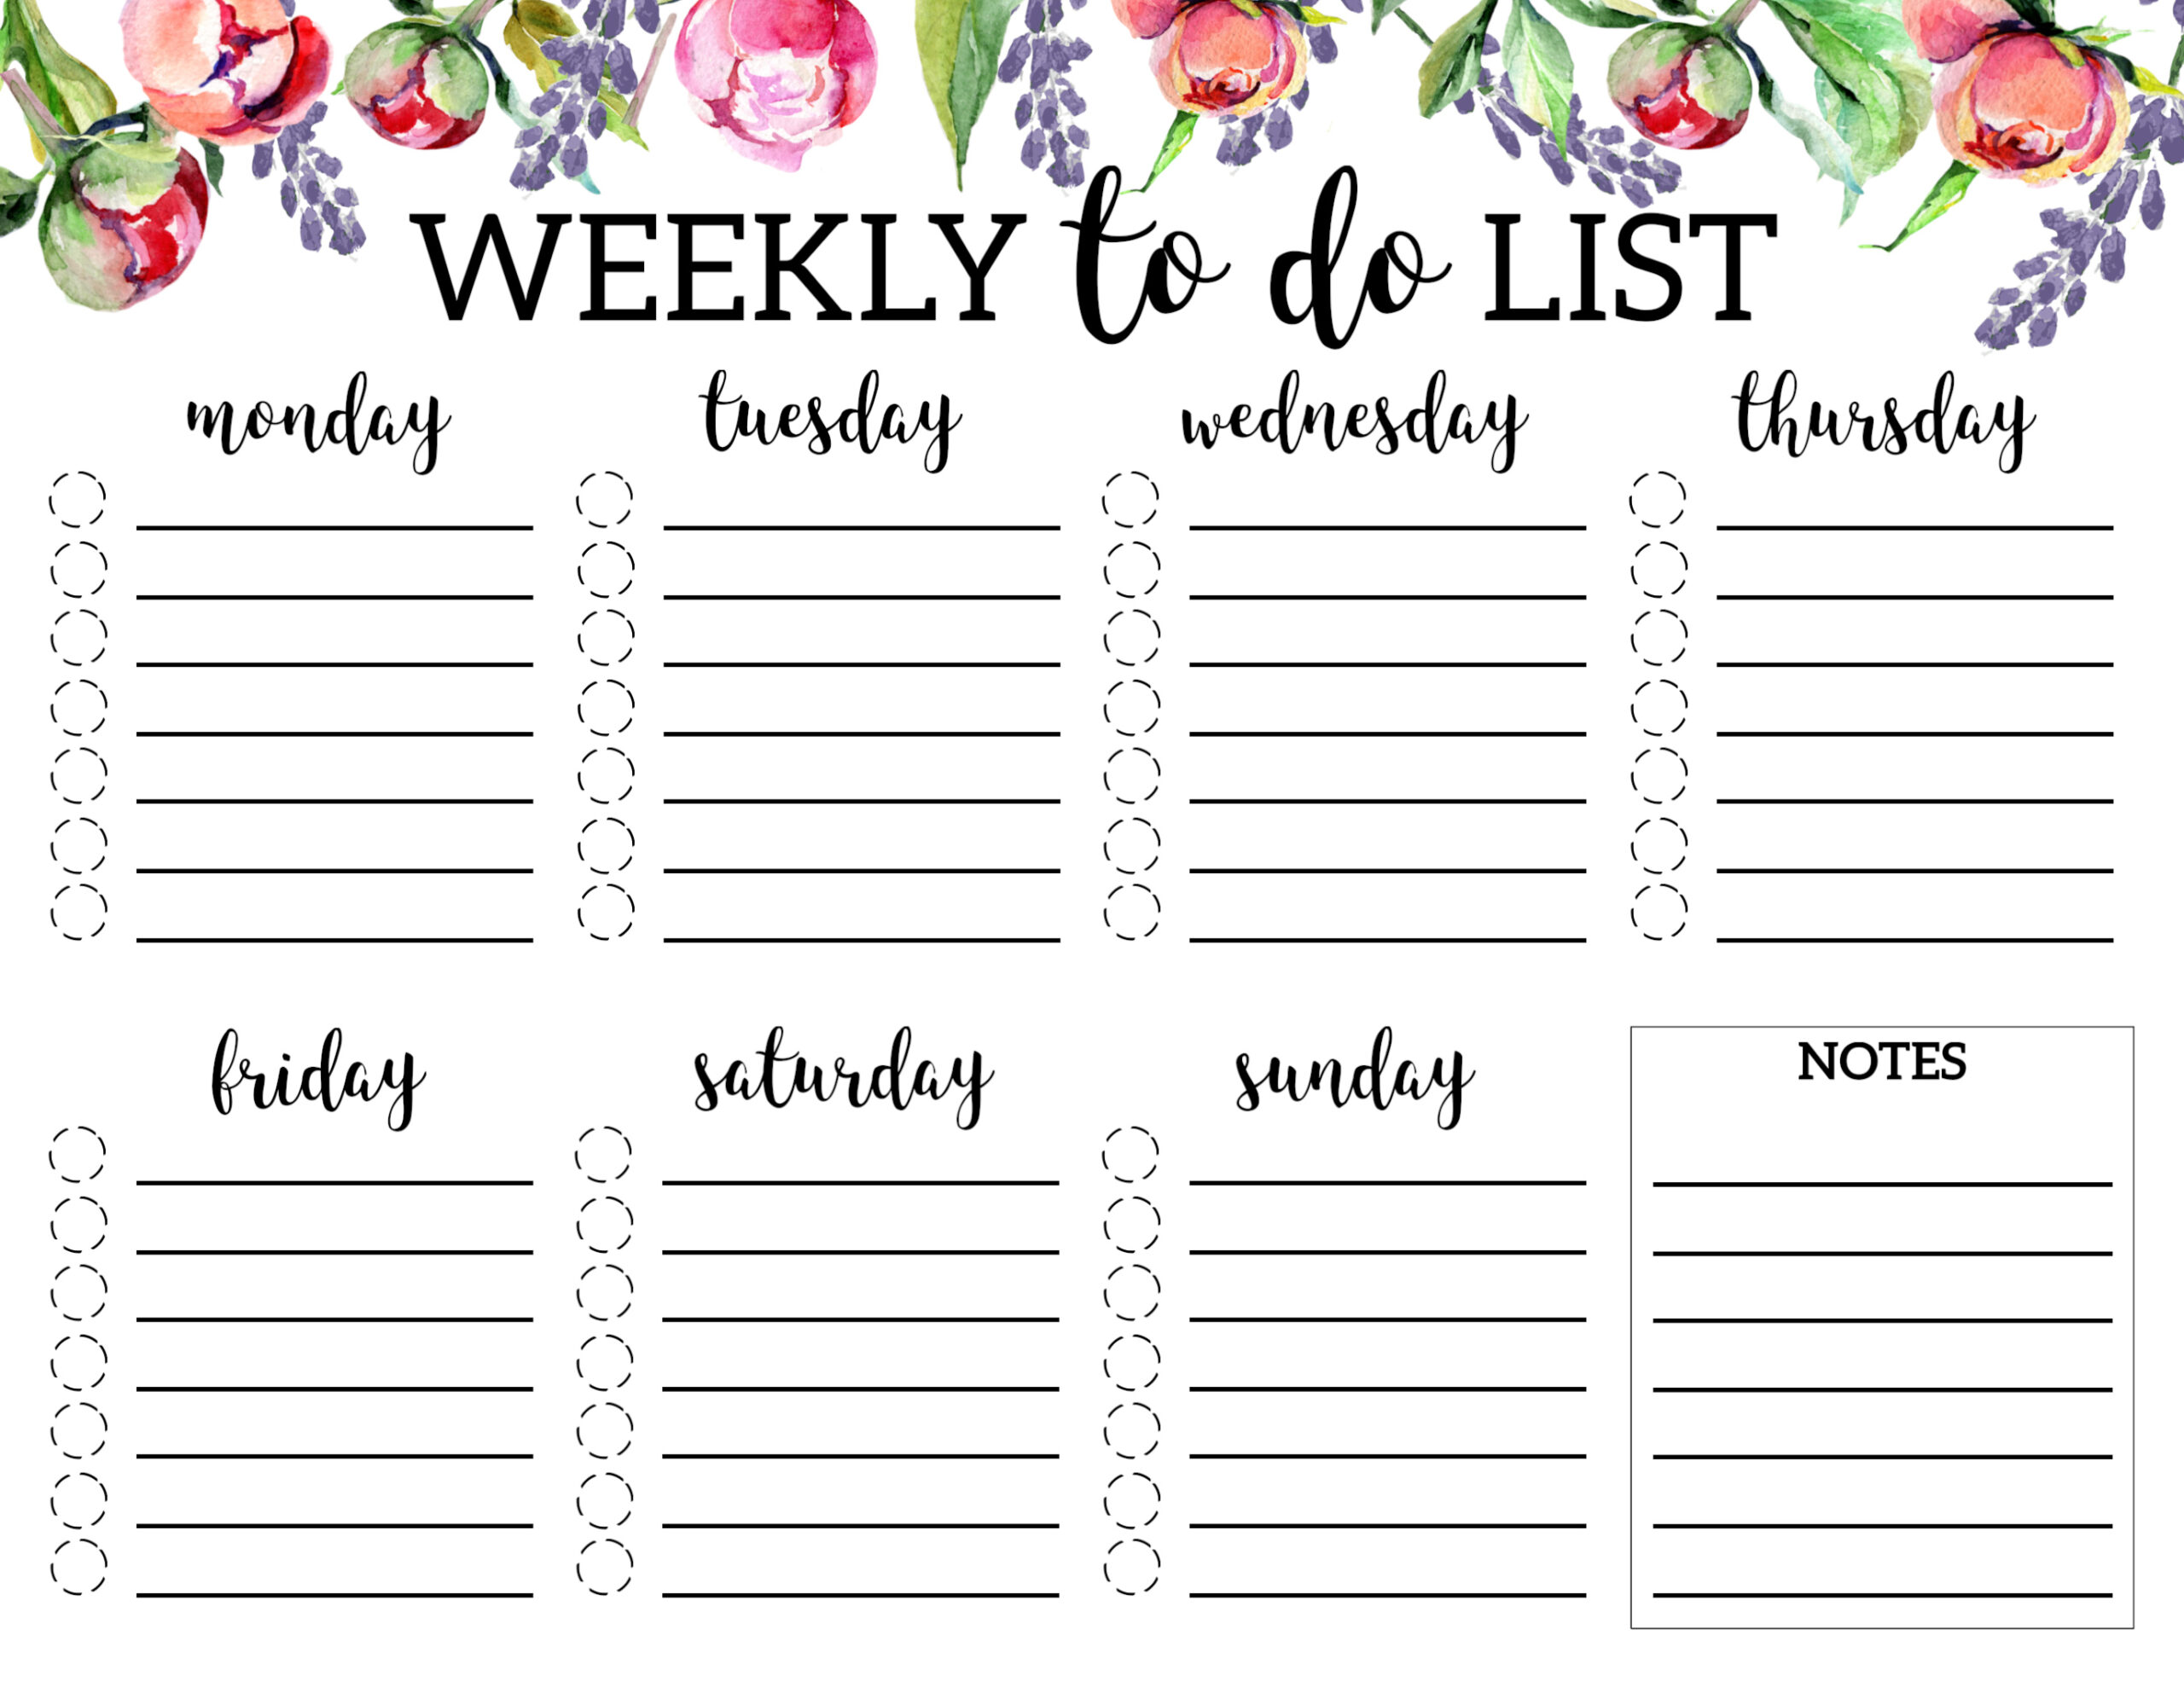 Free Printable To Do List For School